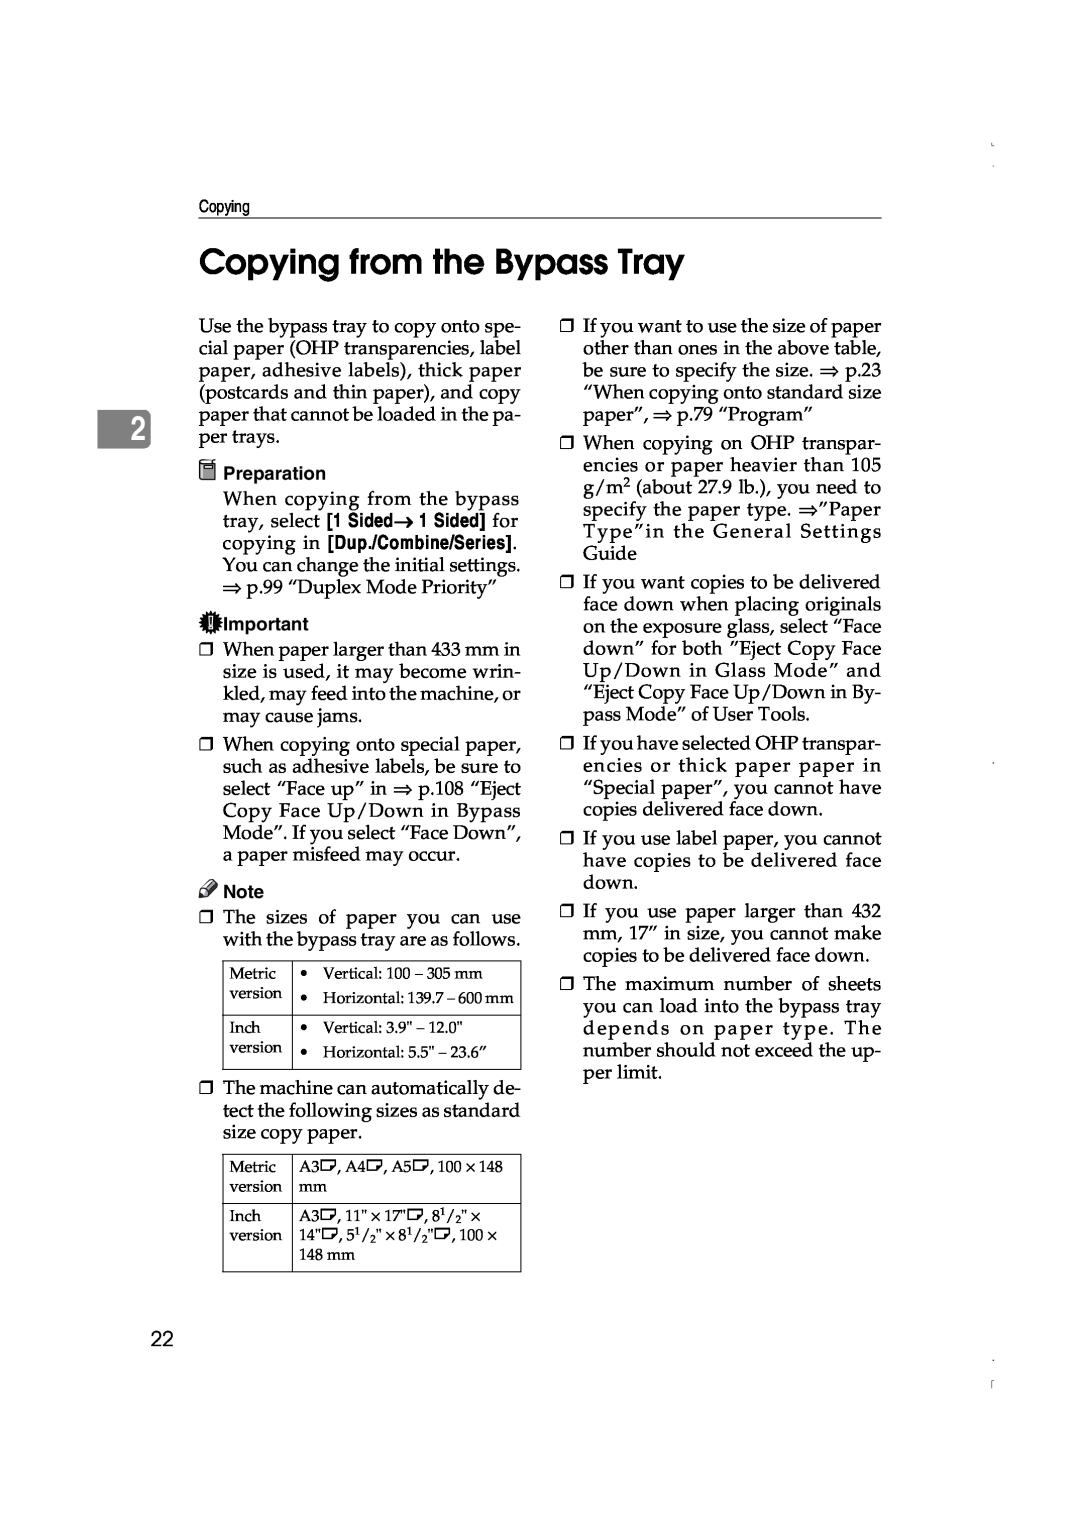 Lanier LD075, LD060 manual Copying from the Bypass Tray, Preparation 